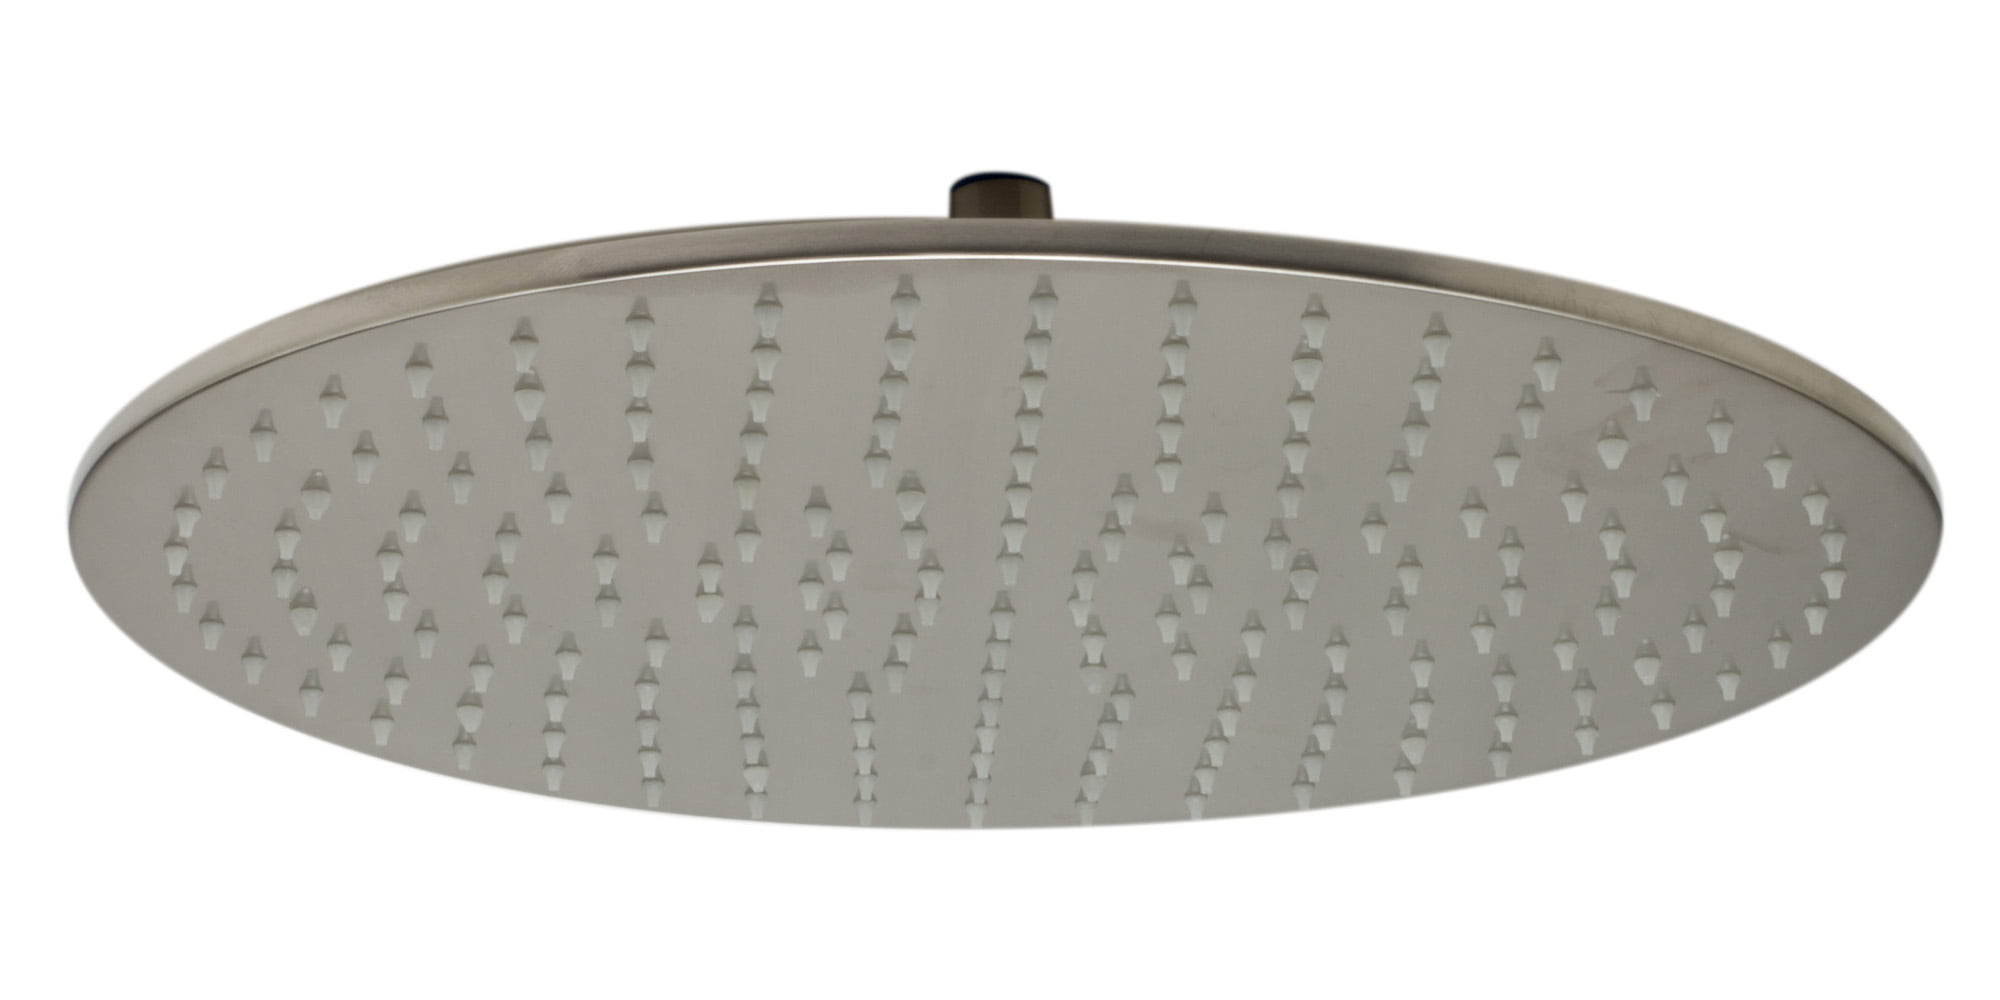 Led16r - Bn 16 In. Round Multi Color Led Rain Shower Head, Brushed Nickel